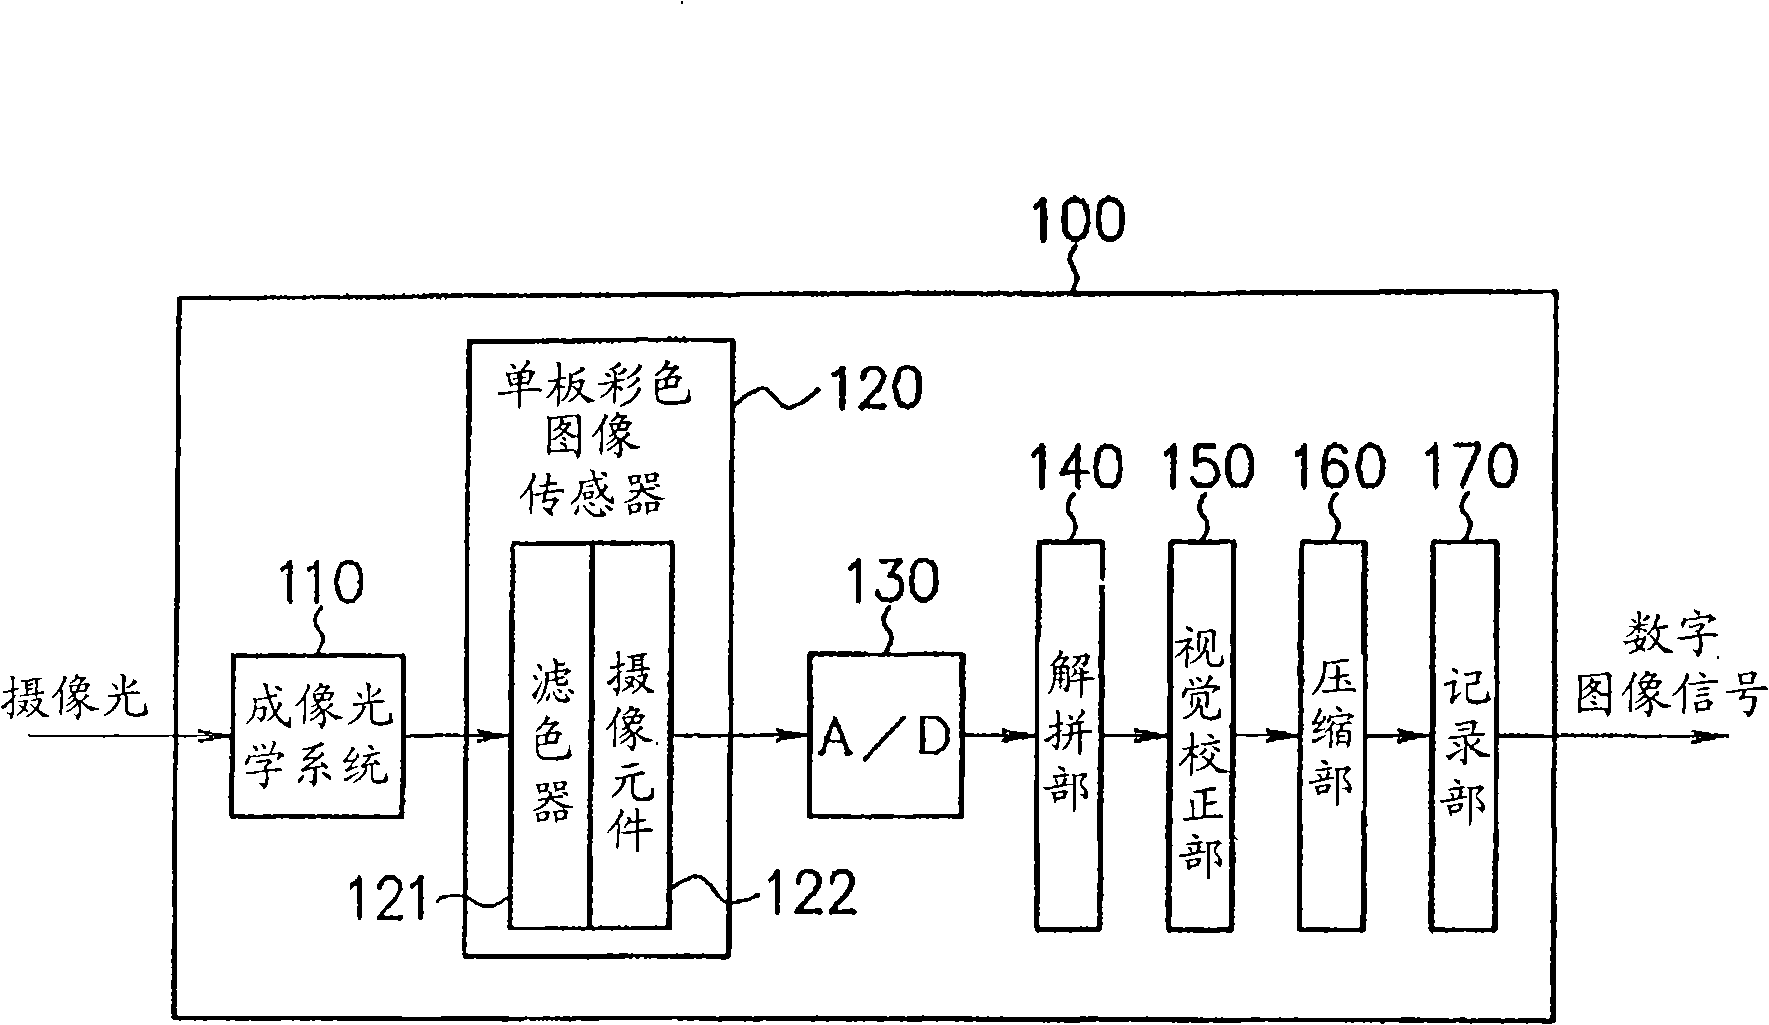 Image processing device, image processing method, program, and imaging device